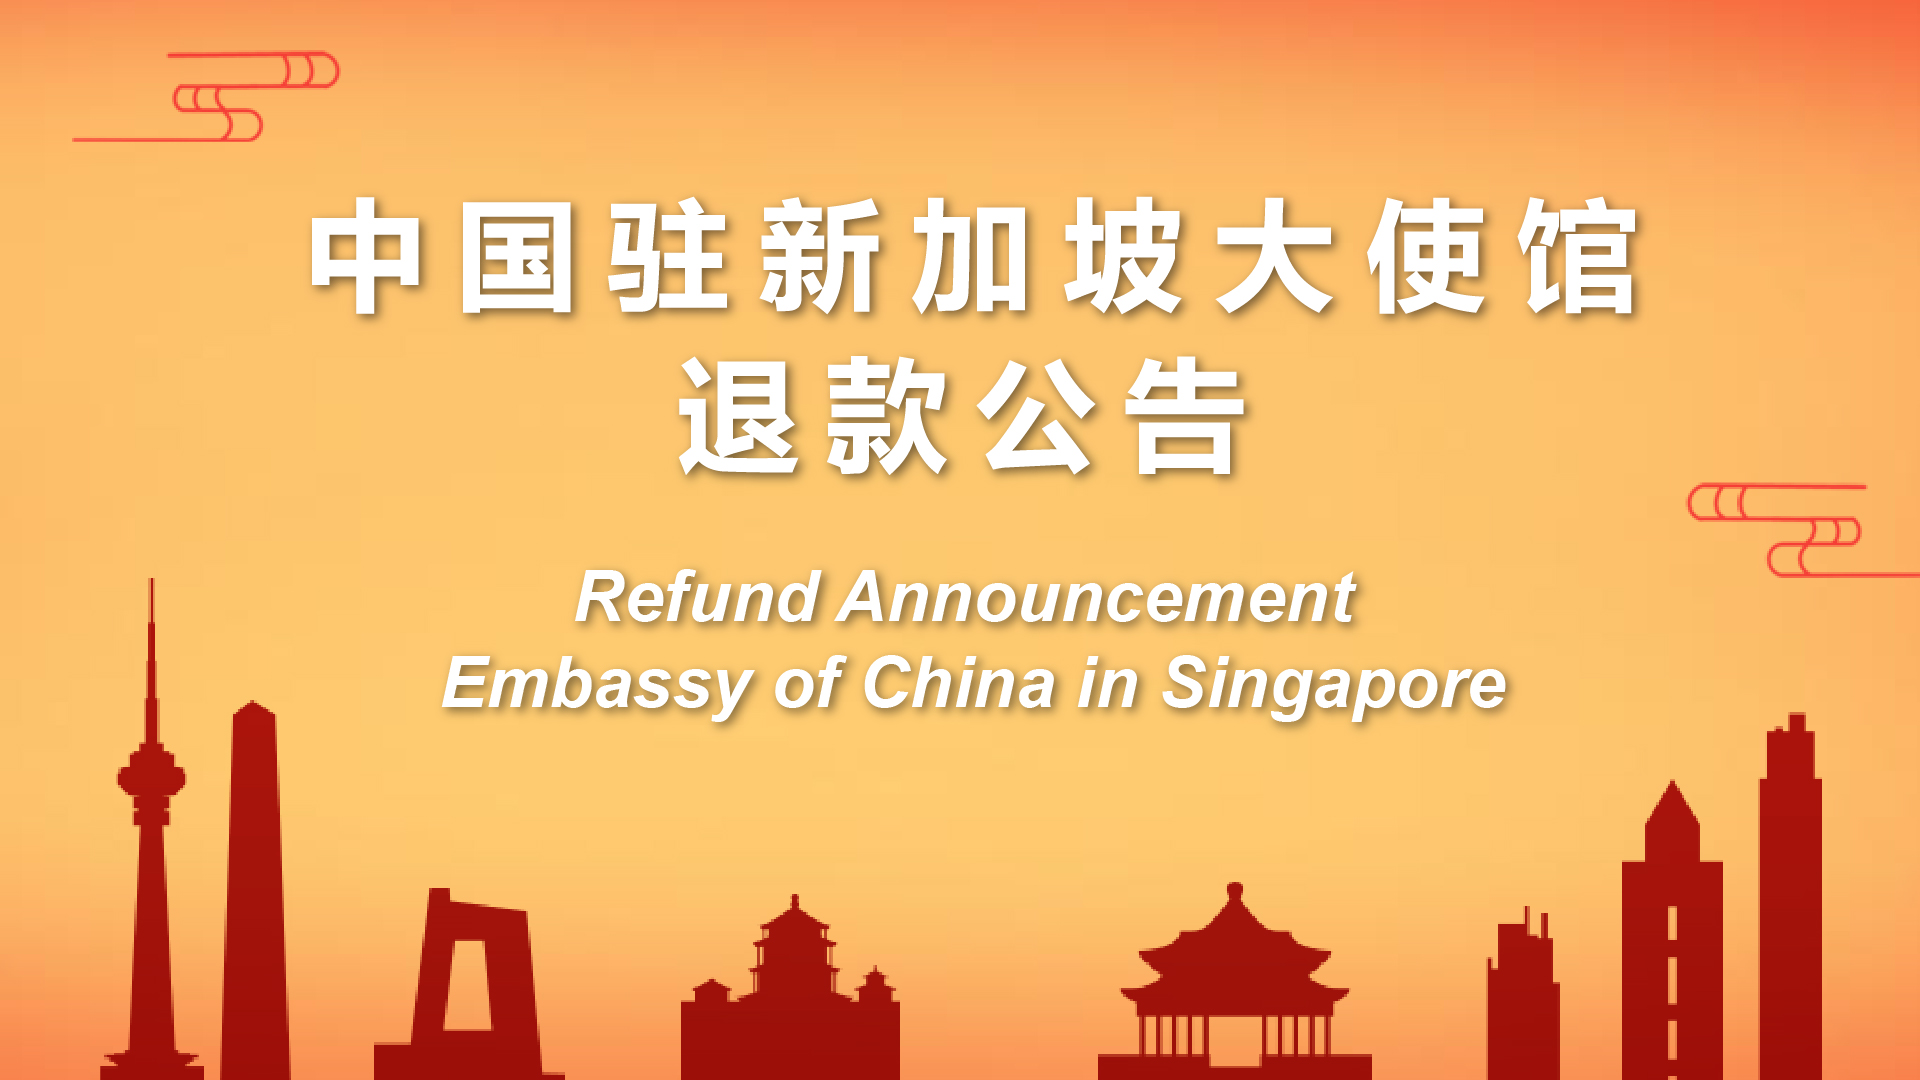 FOMO Pay to provide payment services for Embassy of China in Singapore